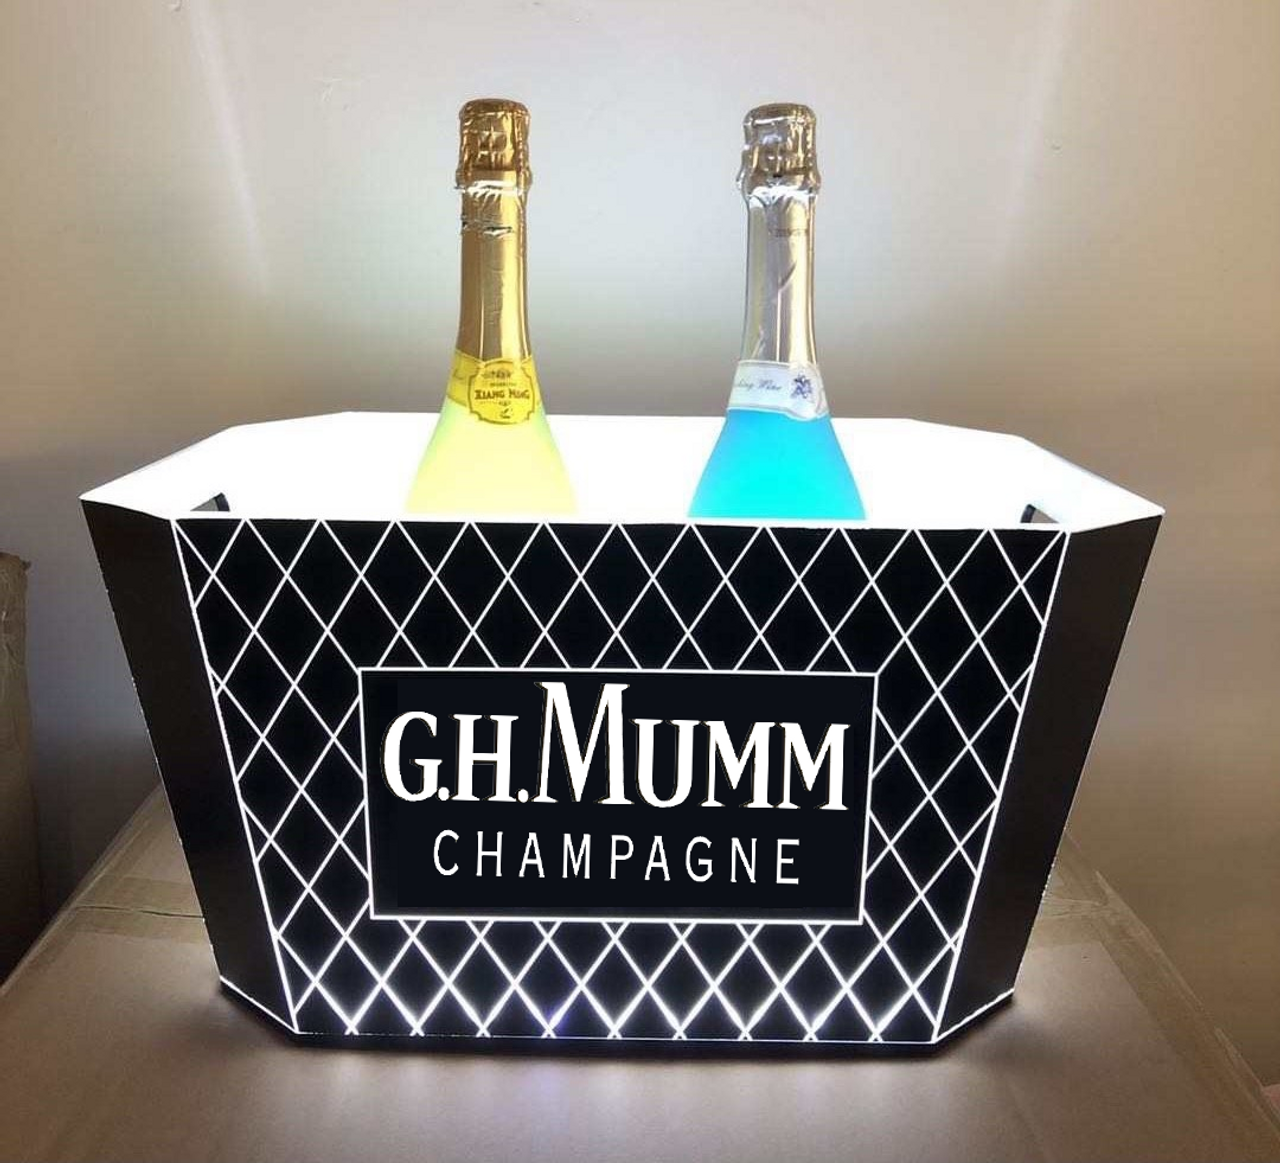 https://cdn11.bigcommerce.com/s-a7mqe/images/stencil/1280x1280/products/1562/8064/GH_mumm_champagne_led_buckets_ice_buckets_lcustom_buckets_champage_buckets__19996.1660939479.png?c=2